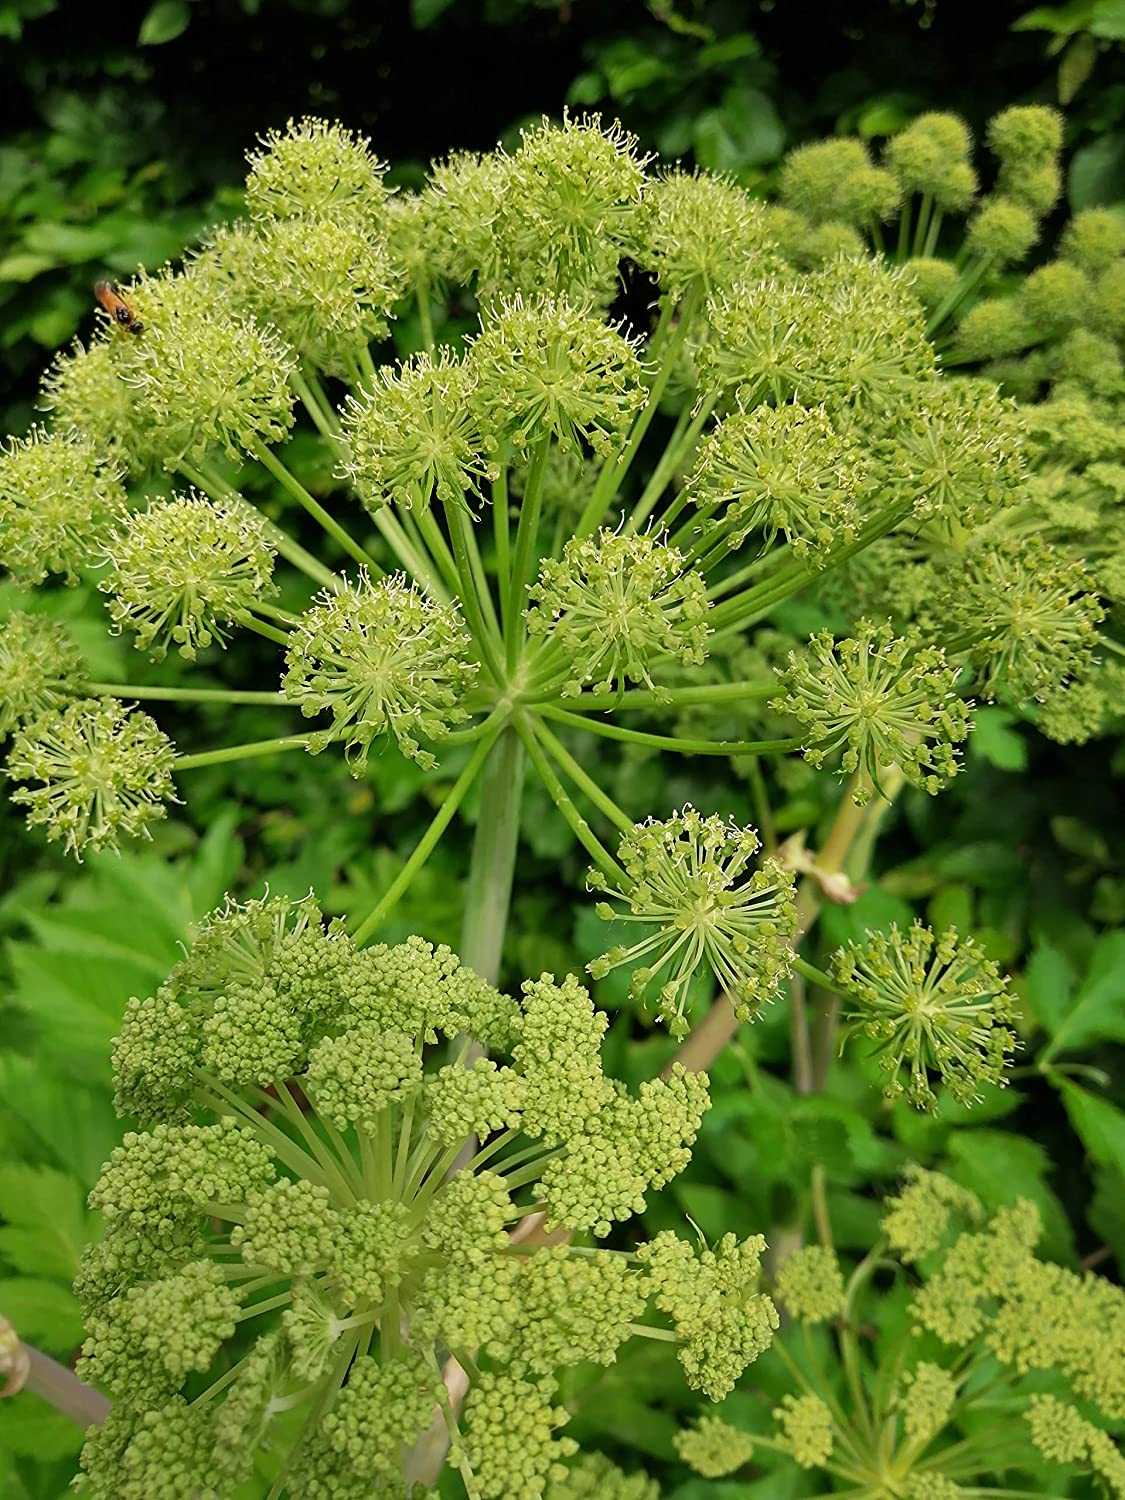 Hundredfold Lovage 100 Herb Seeds - Levisticum officinale Cold-Hardy Celery & Parsley Flavor, Roots Used as Vegetable, Seeds as Spice, Packed and Shipped in Canada